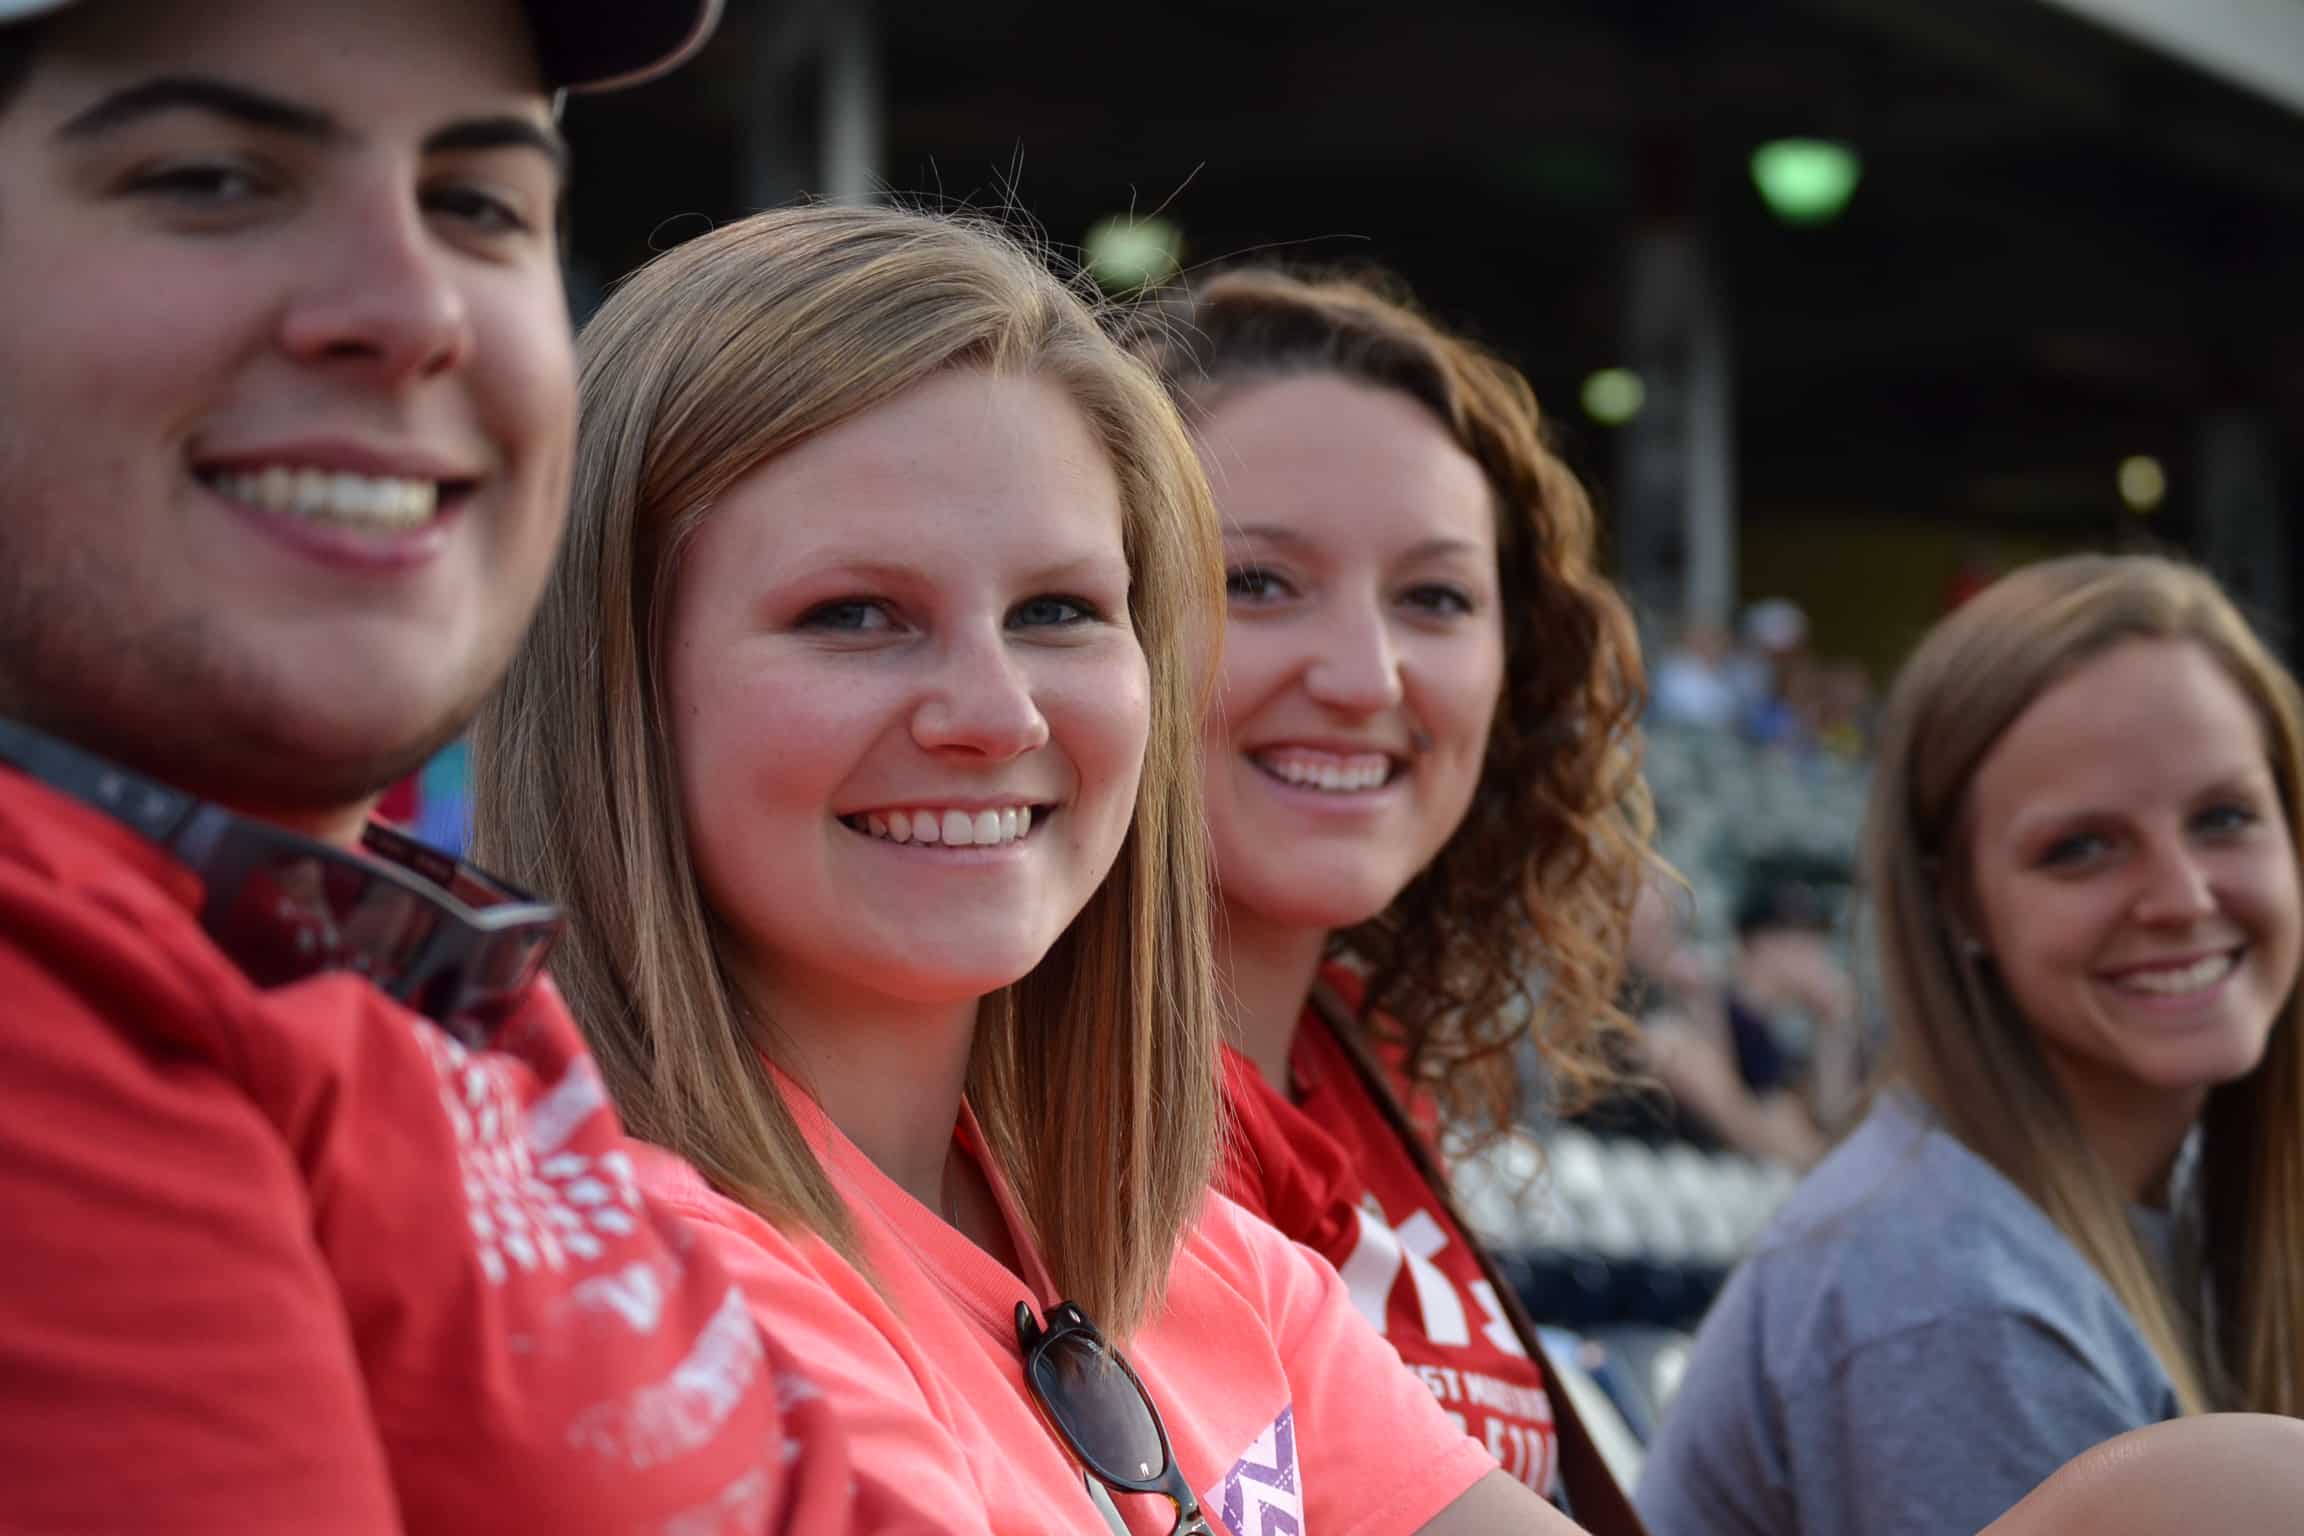  Dillon Webster, Danielle Kiessling, Tori Freedman and Sarah Armstrong cheer on the NGU baseball team with loud screams and excited faces.&nbsp; 